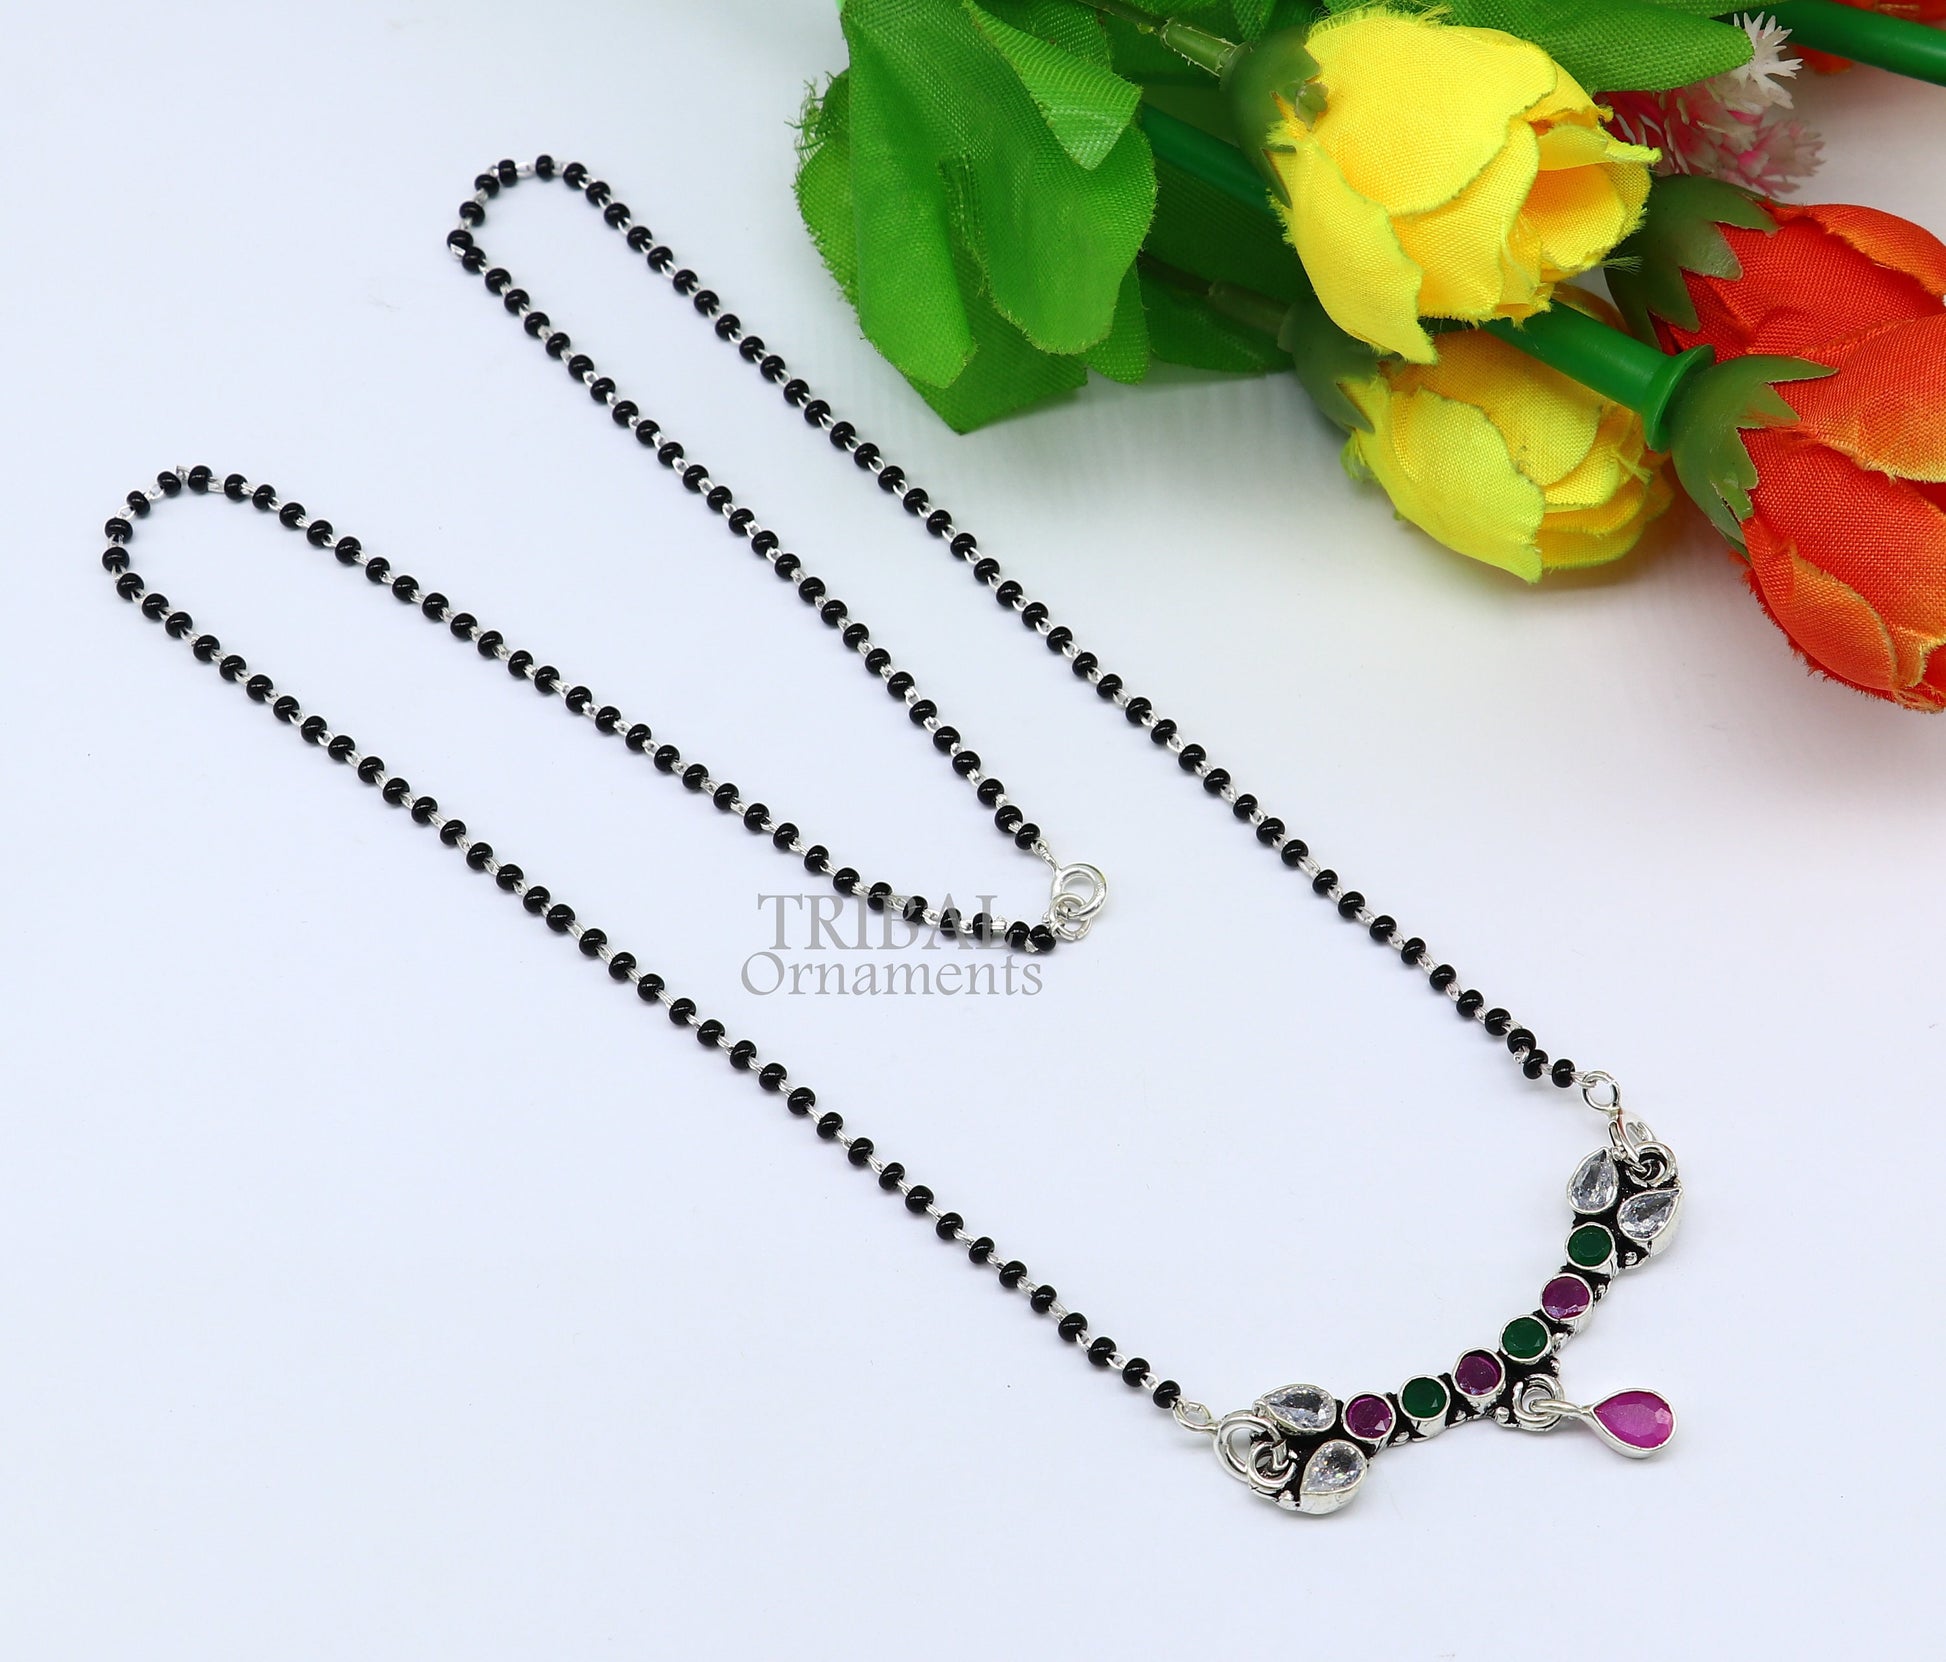 Green and red cut stone elegant pendant 925 sterling silver black beads chain necklace, traditional style brides Mangalsutra necklace ms14 - TRIBAL ORNAMENTS